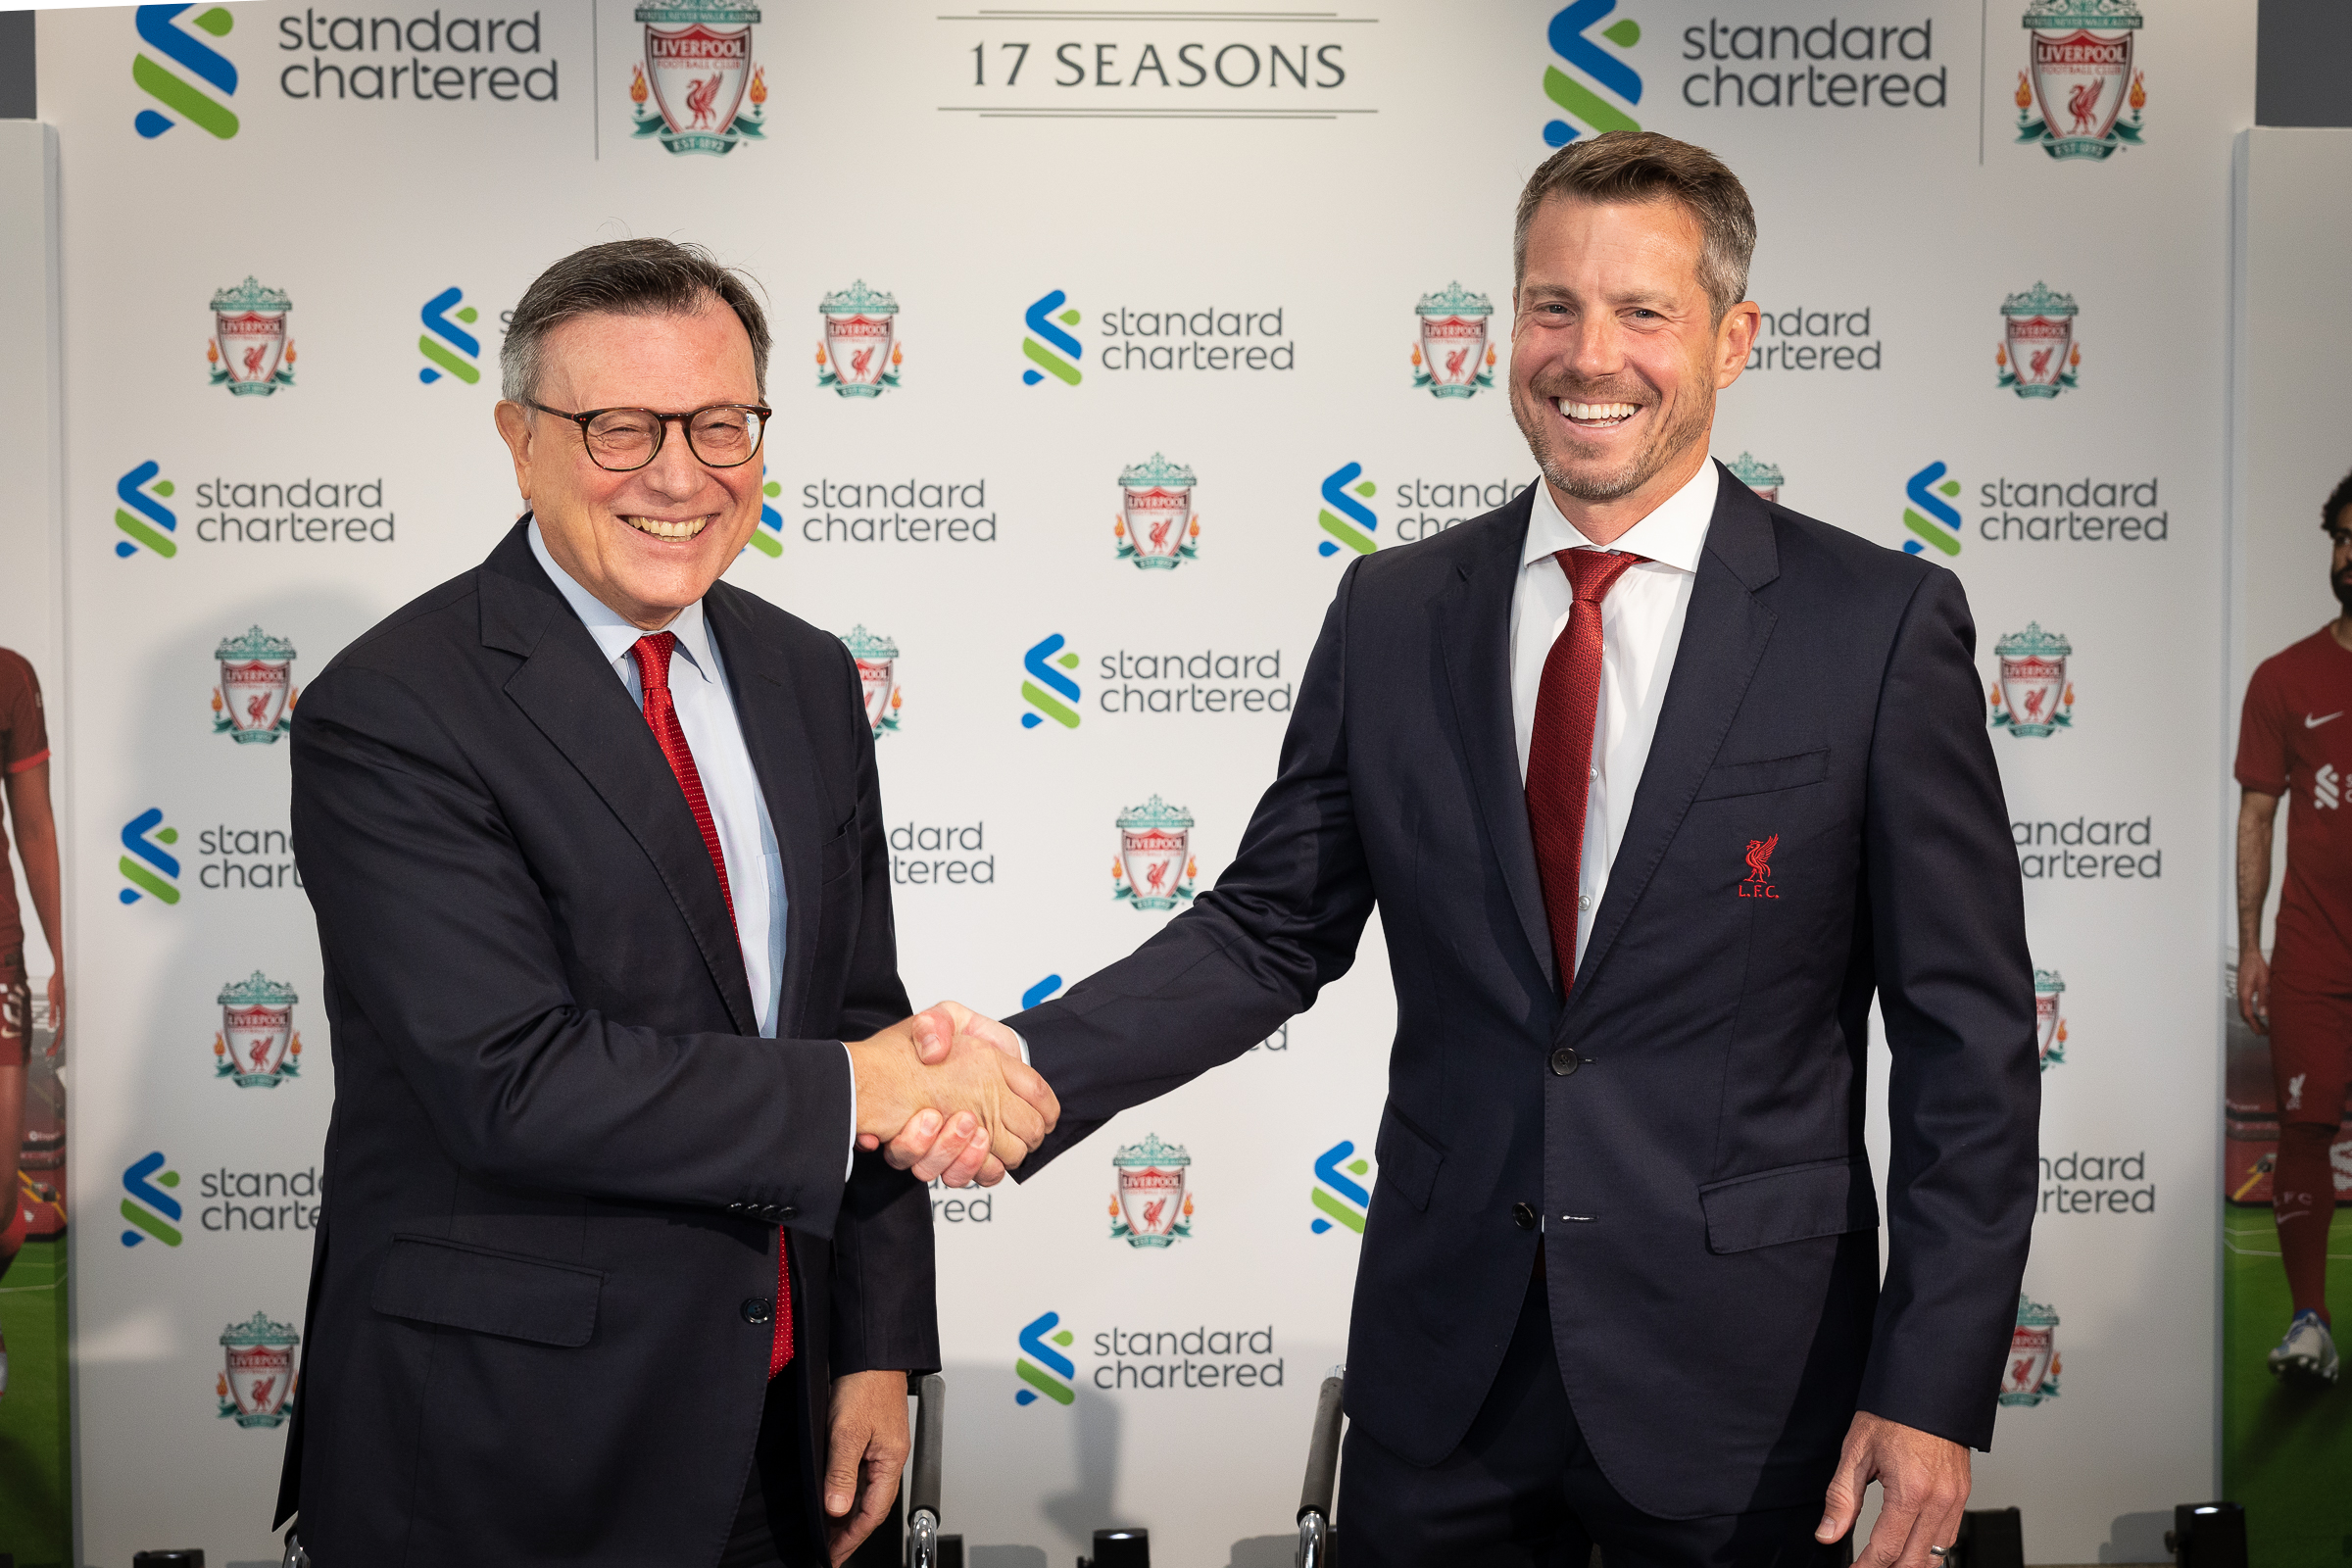 Standard Chartered's Chairman and Liverpool FC's CEO shake hands to mark sponsorship extension